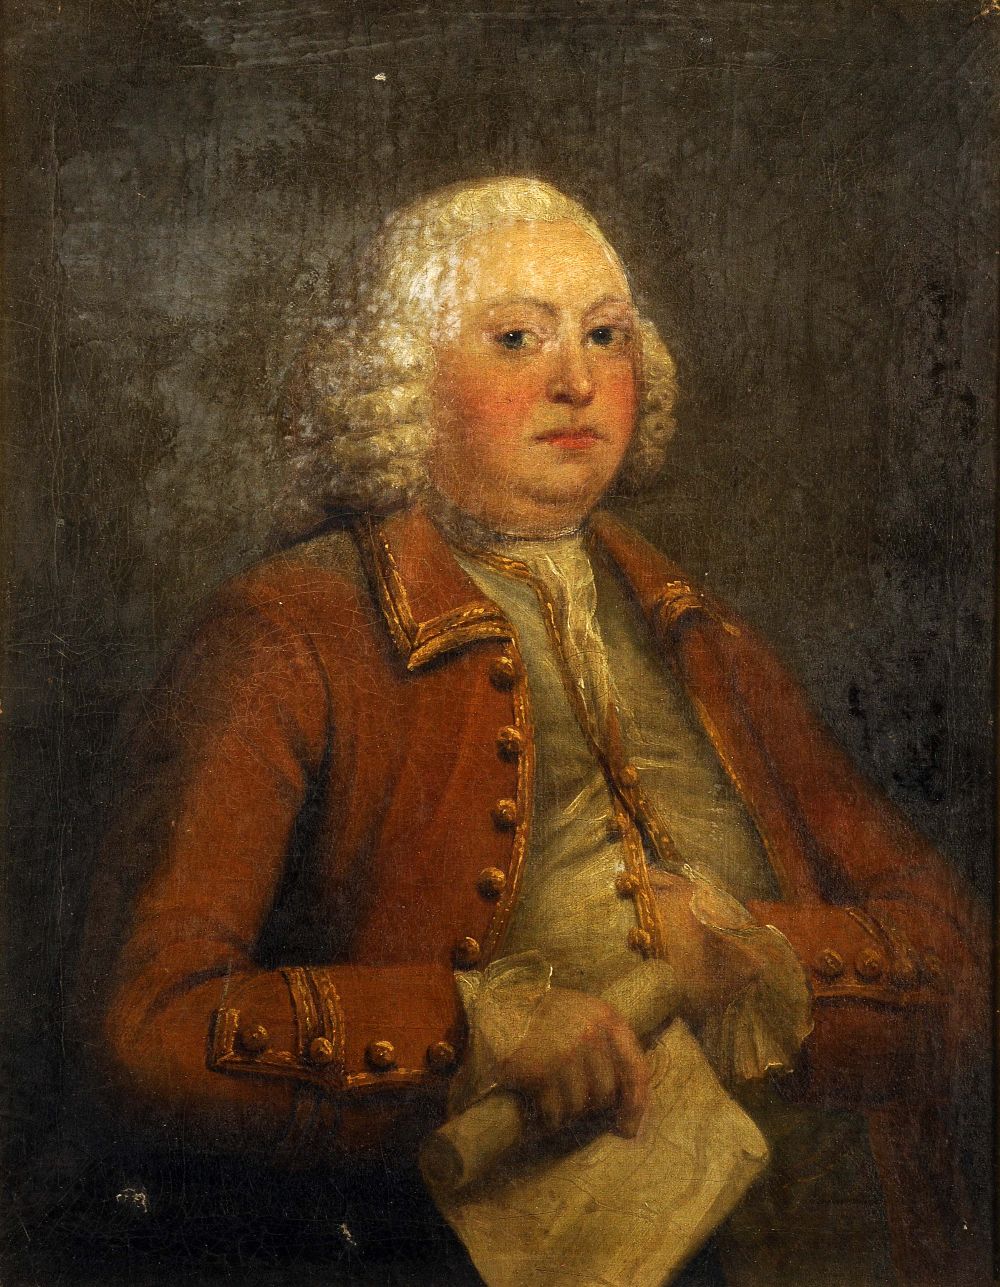 Framed, unsigned, oil on canvas, 18th Century half length portrait of a seated gentleman holding a